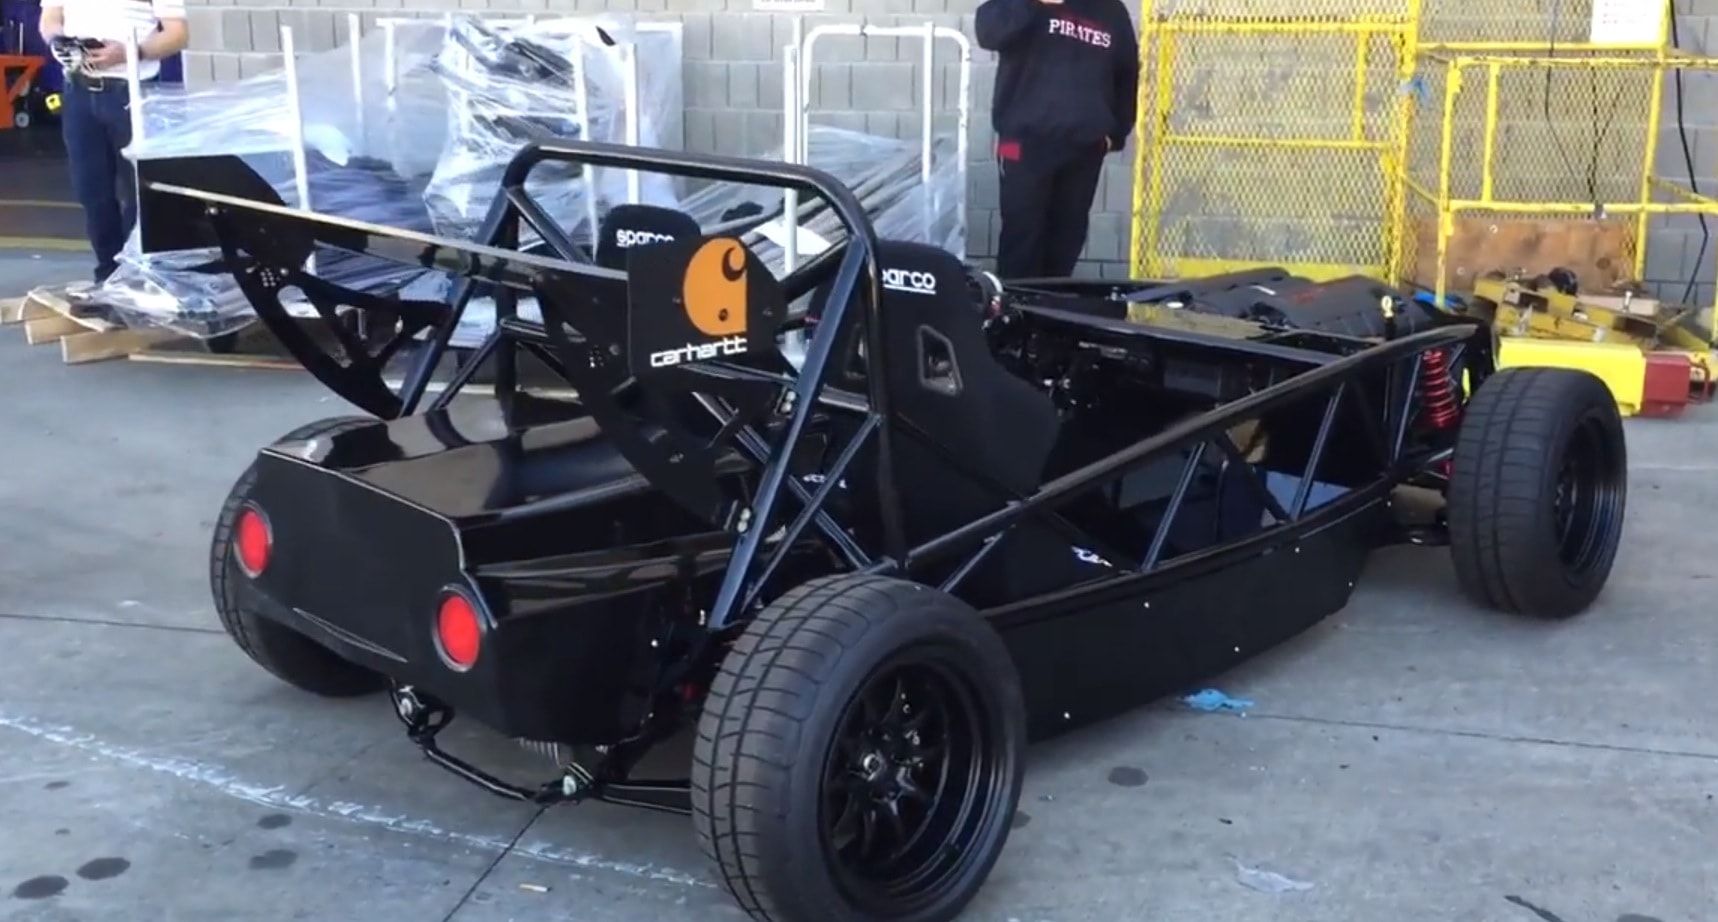 The American Ariel Atom Is a Corvette-Powered Miata with an